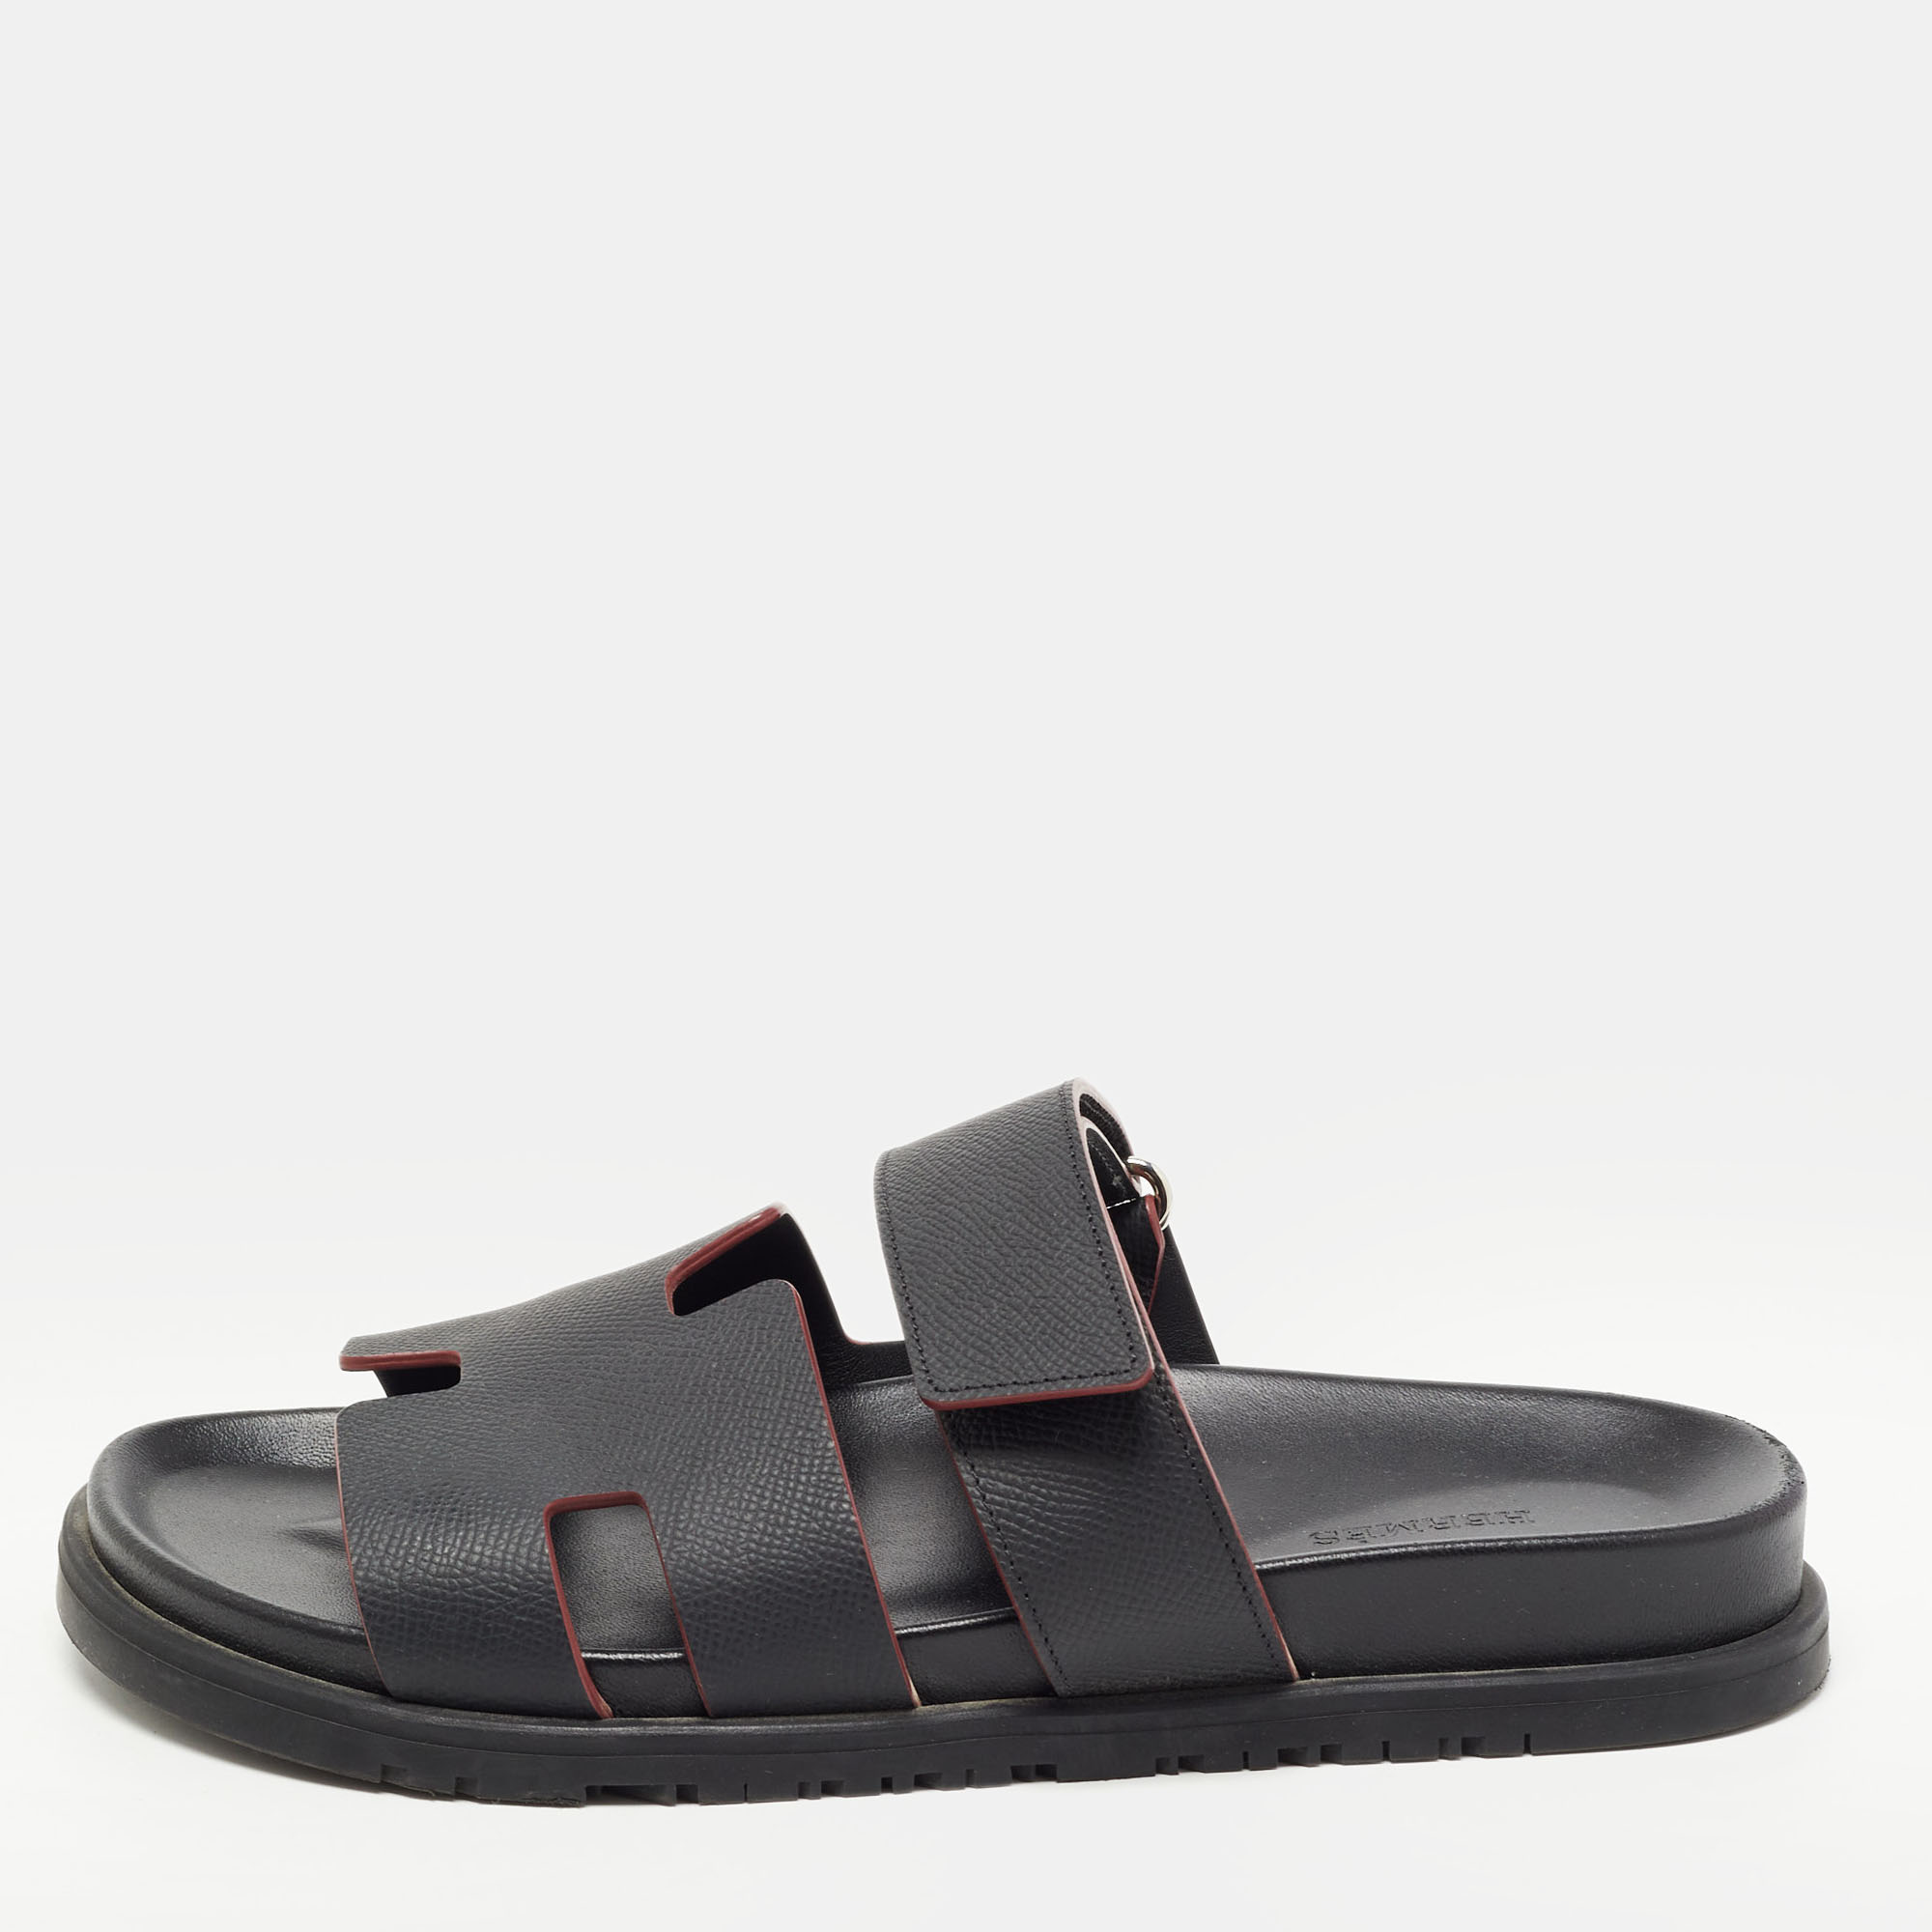 Hermes Black Textured Leather Chypre Sandals Size 40 Hermes | The ...